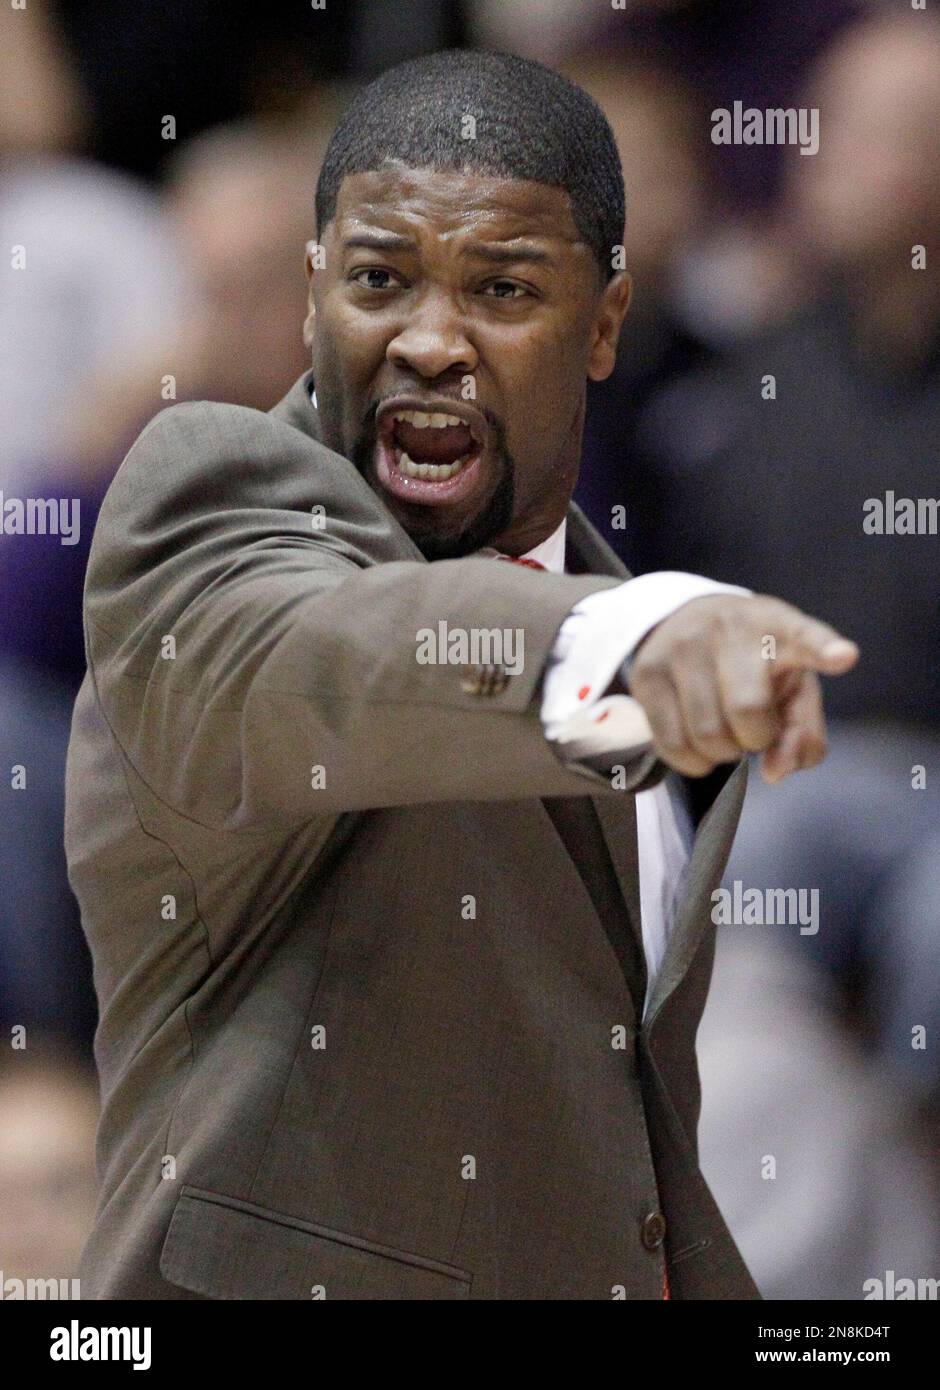 Mississippi Valley State head coach Chico Potts points as he directs his team during the first half of an NCAA college basketball game against Northwestern in Evanston, Ill., on Thursday, Nov. 15, 2012. (AP Photo/Nam Y. Huh) Stock Photo